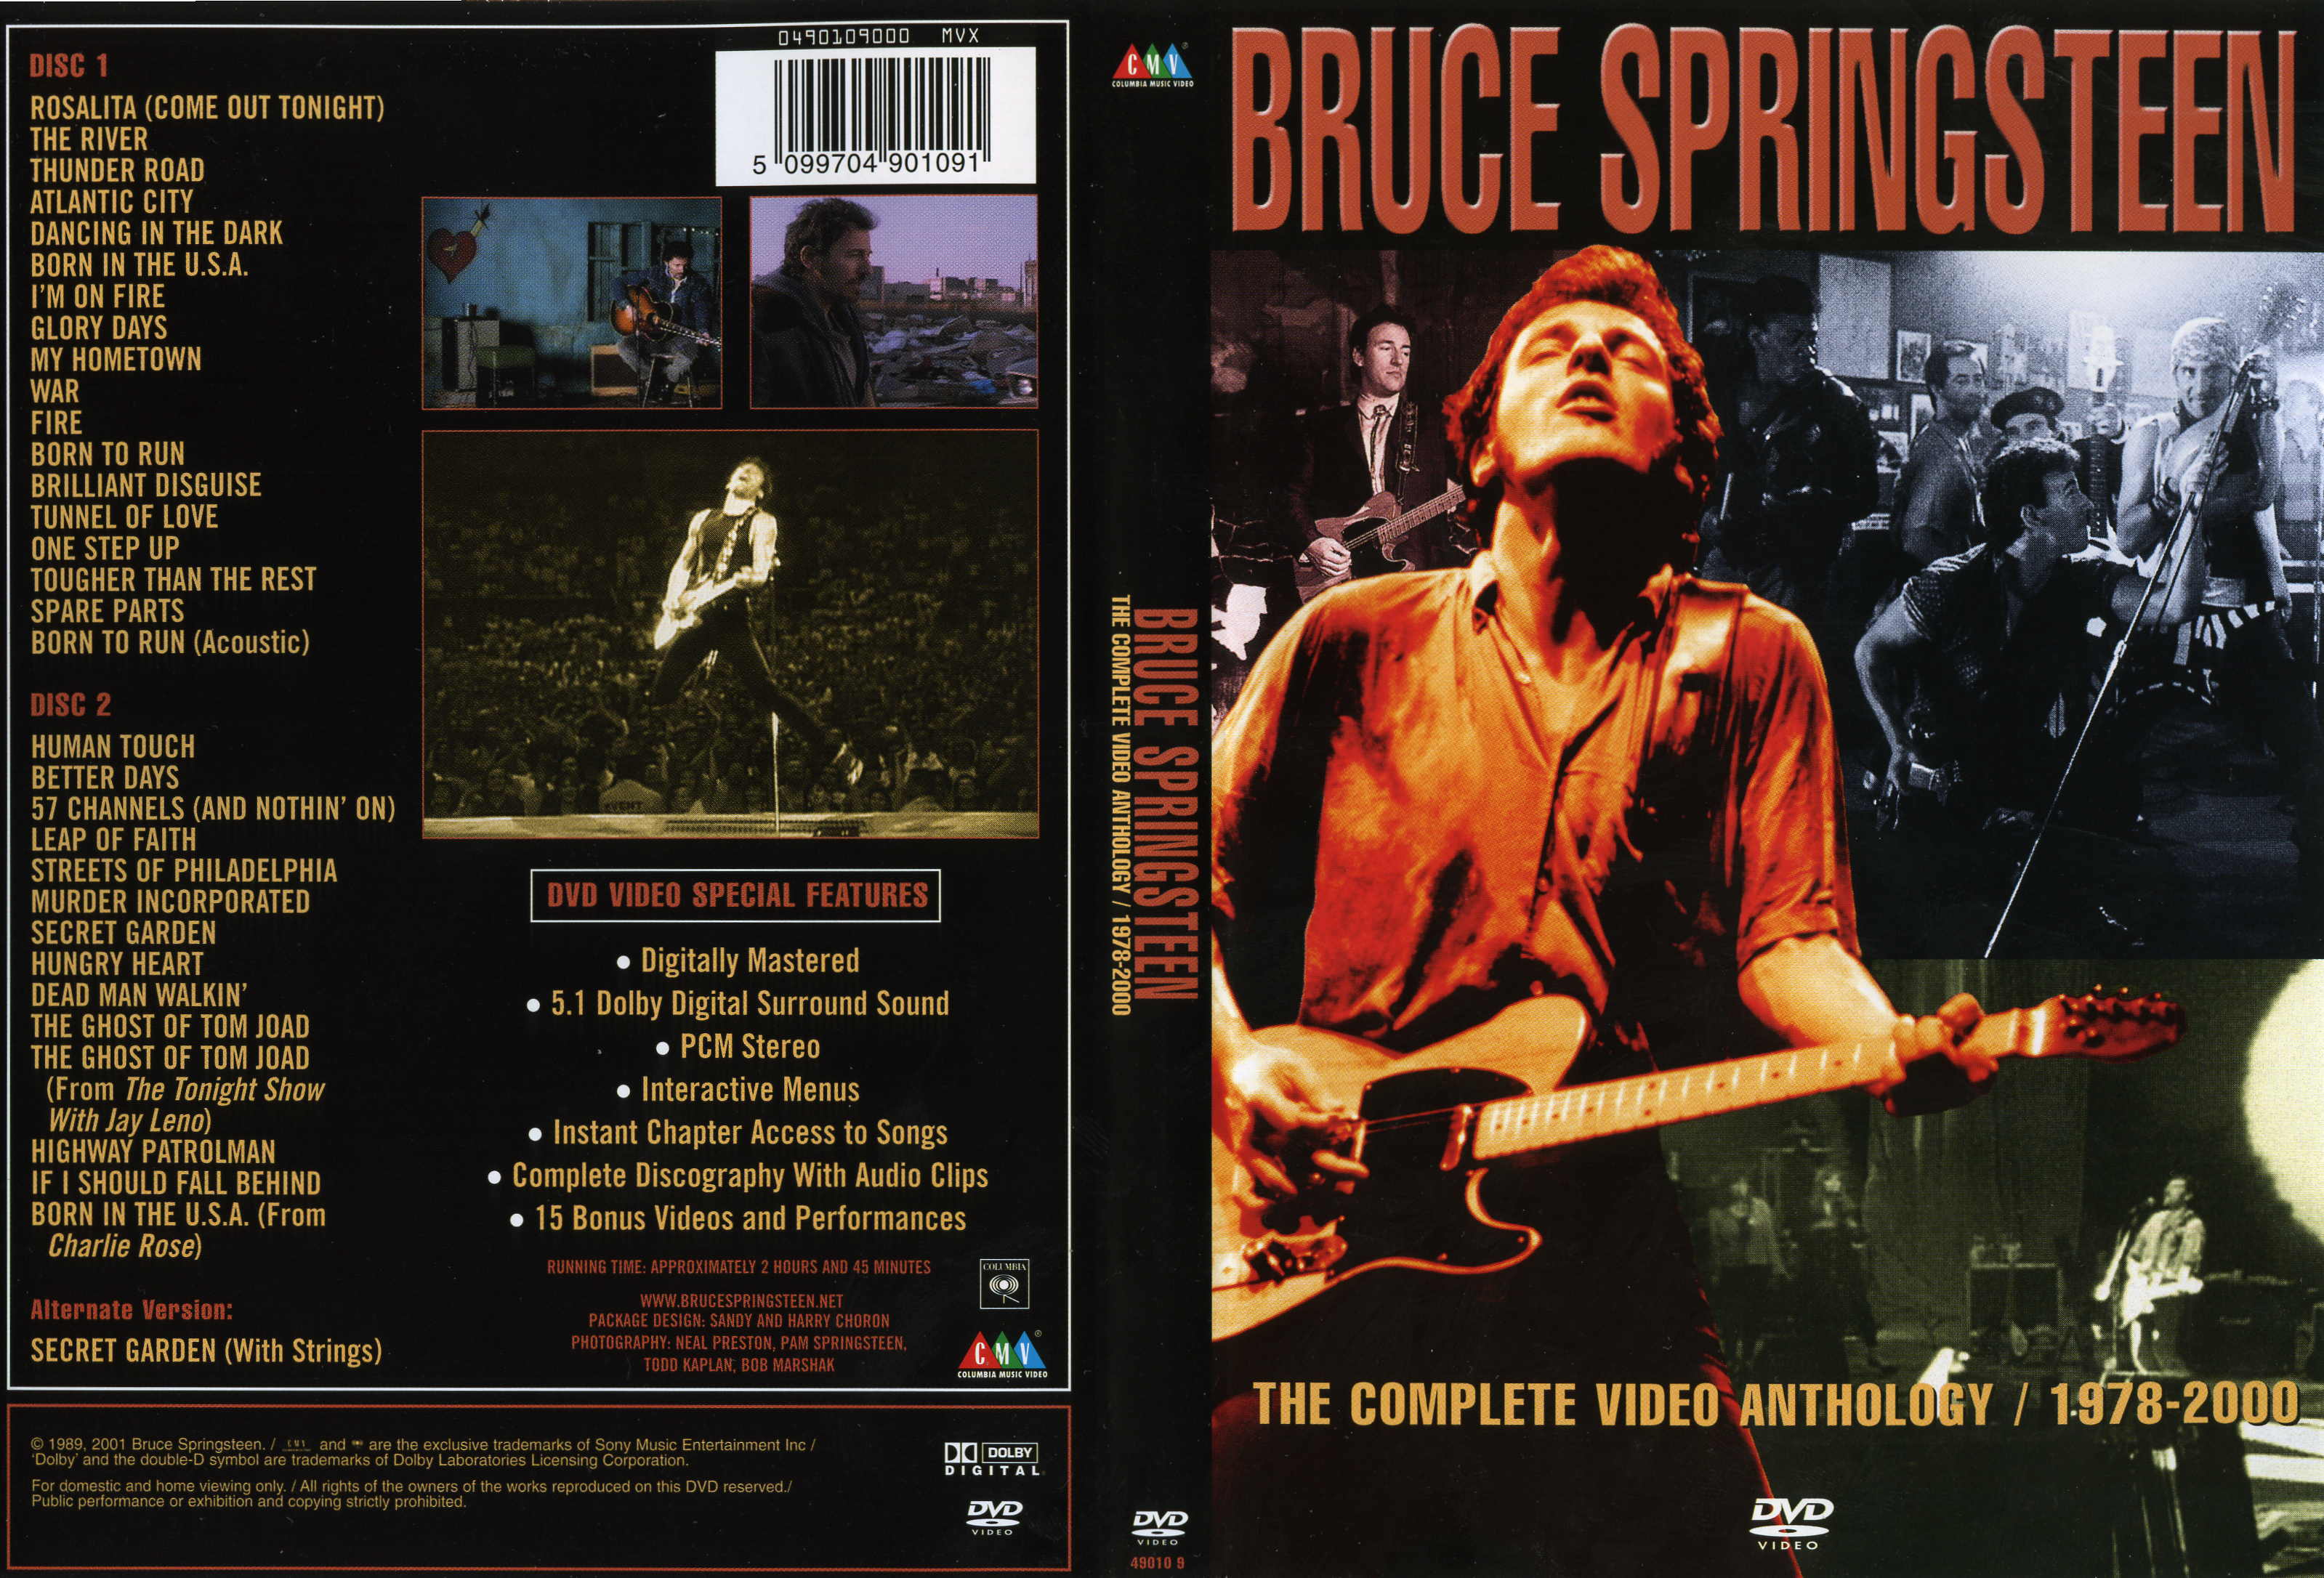 Jaquette DVD Bruce Springsteen - The complete video anthology 1978-2000